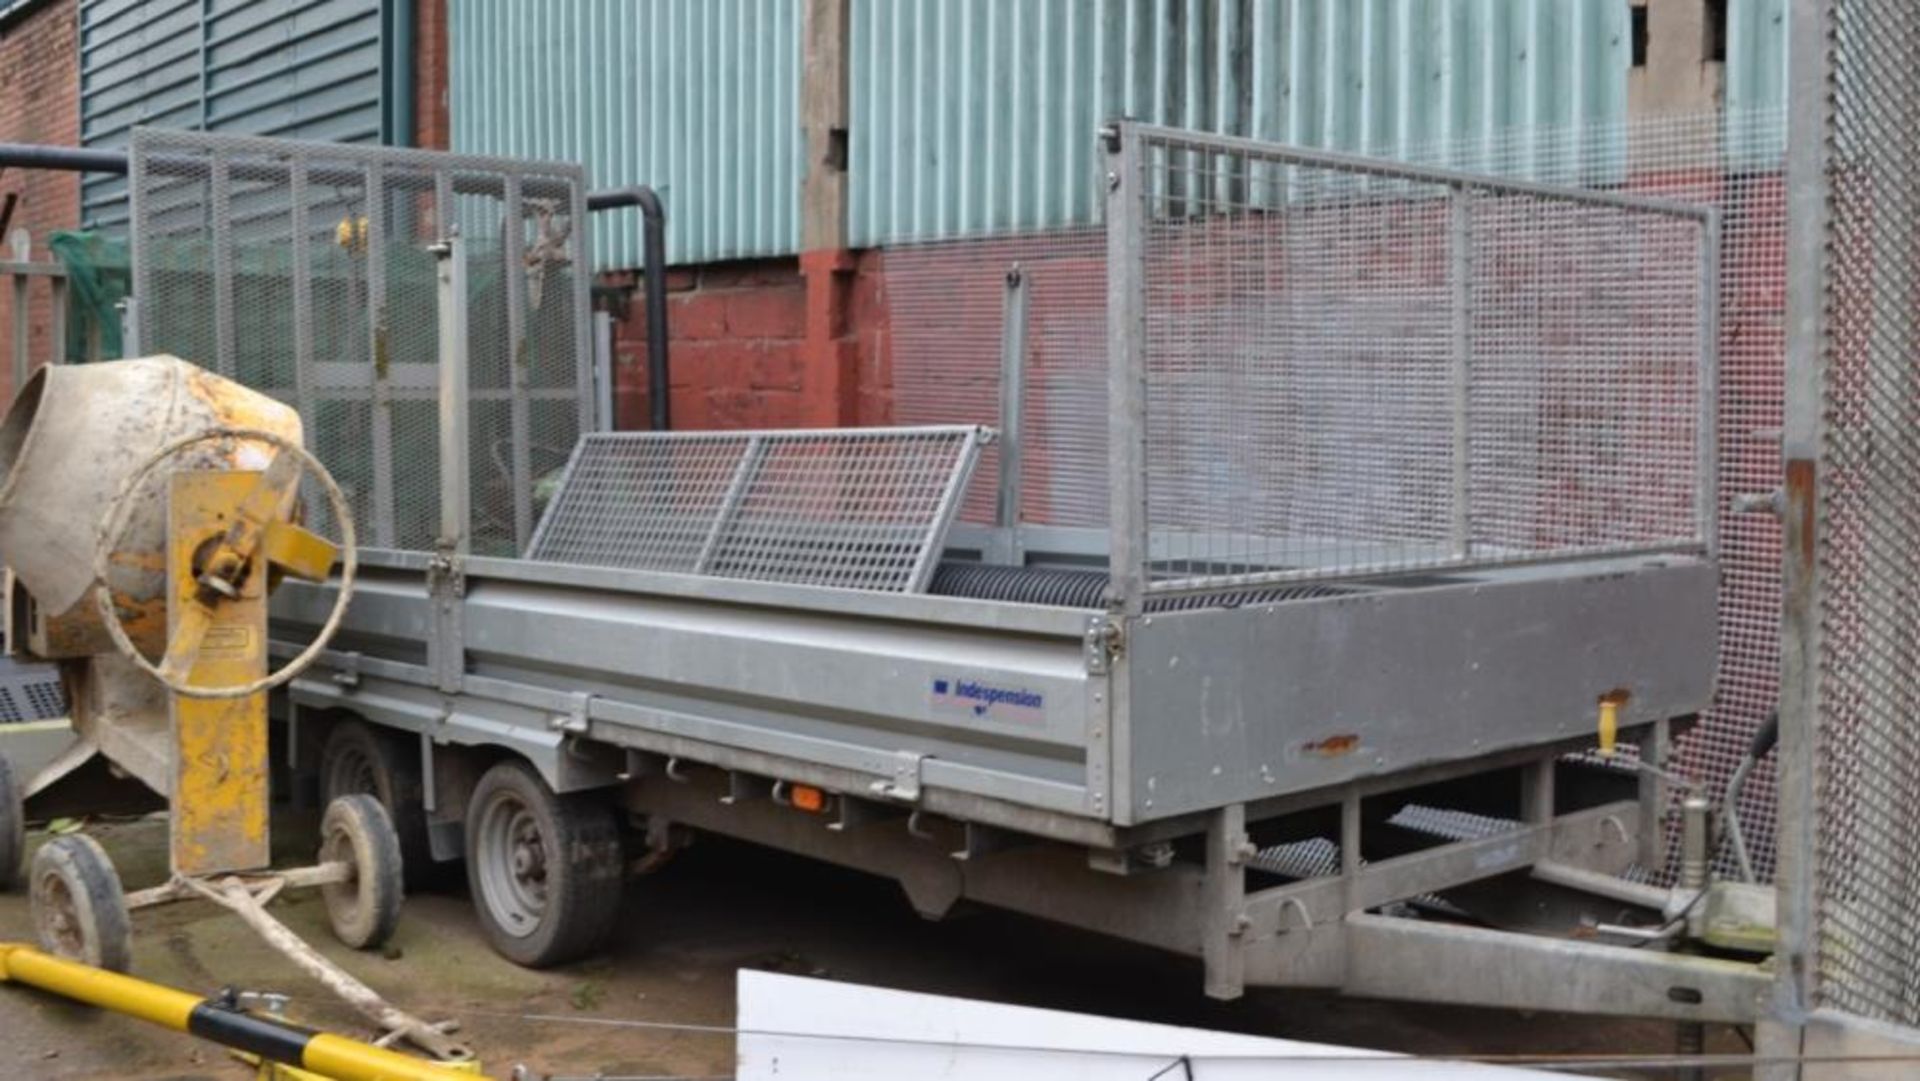 1 x Challenger Indespension 16ft Trailer With Triple Lock System - CL464 - Location:Liverpool L19 - Image 2 of 18